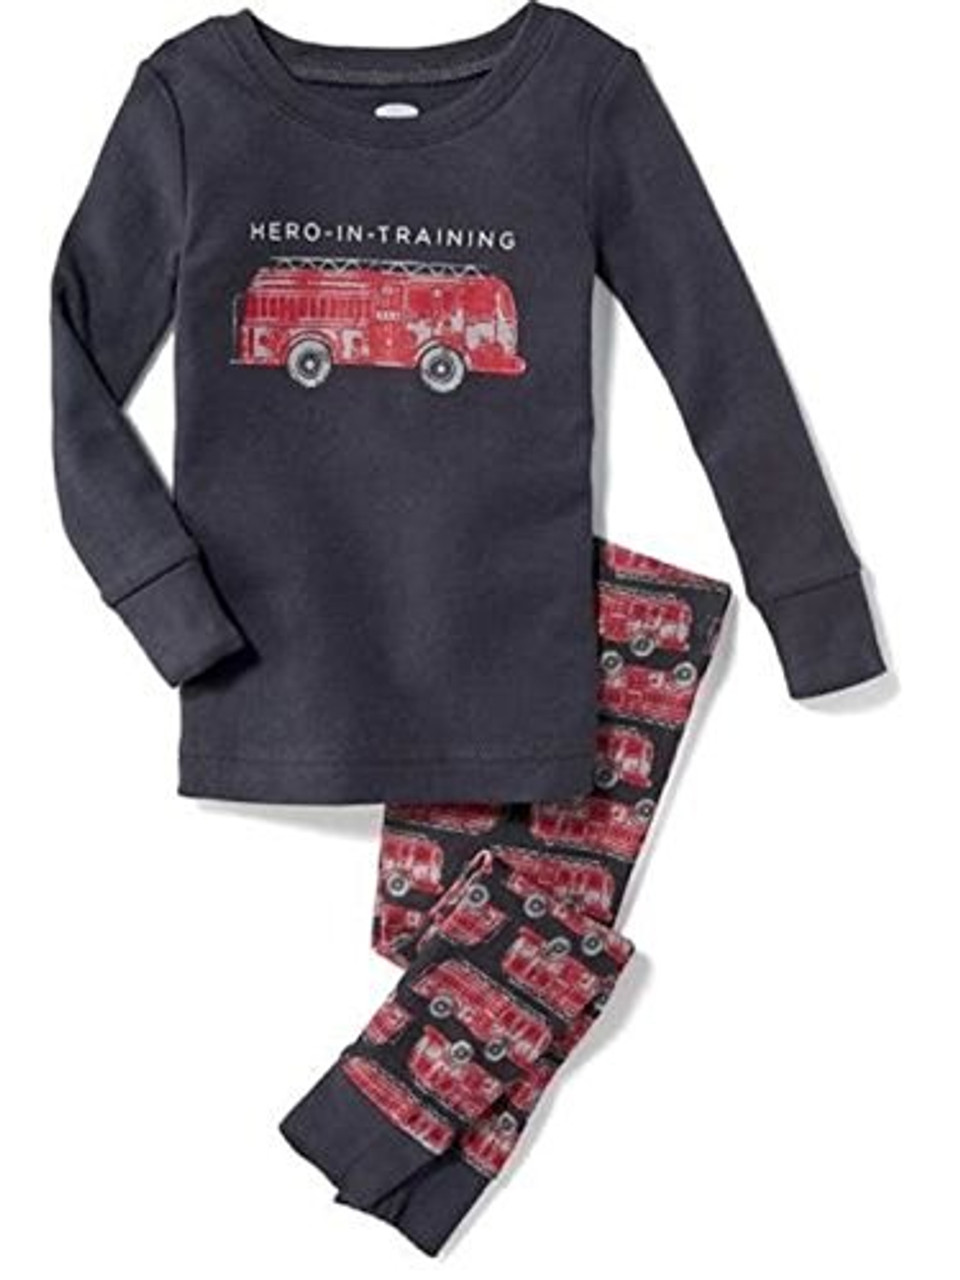 Old Navy Hero-In-Training Fire Truck Cotton Pants Pajama Set Size 12-18  Months - Little Dreamers Pajamas